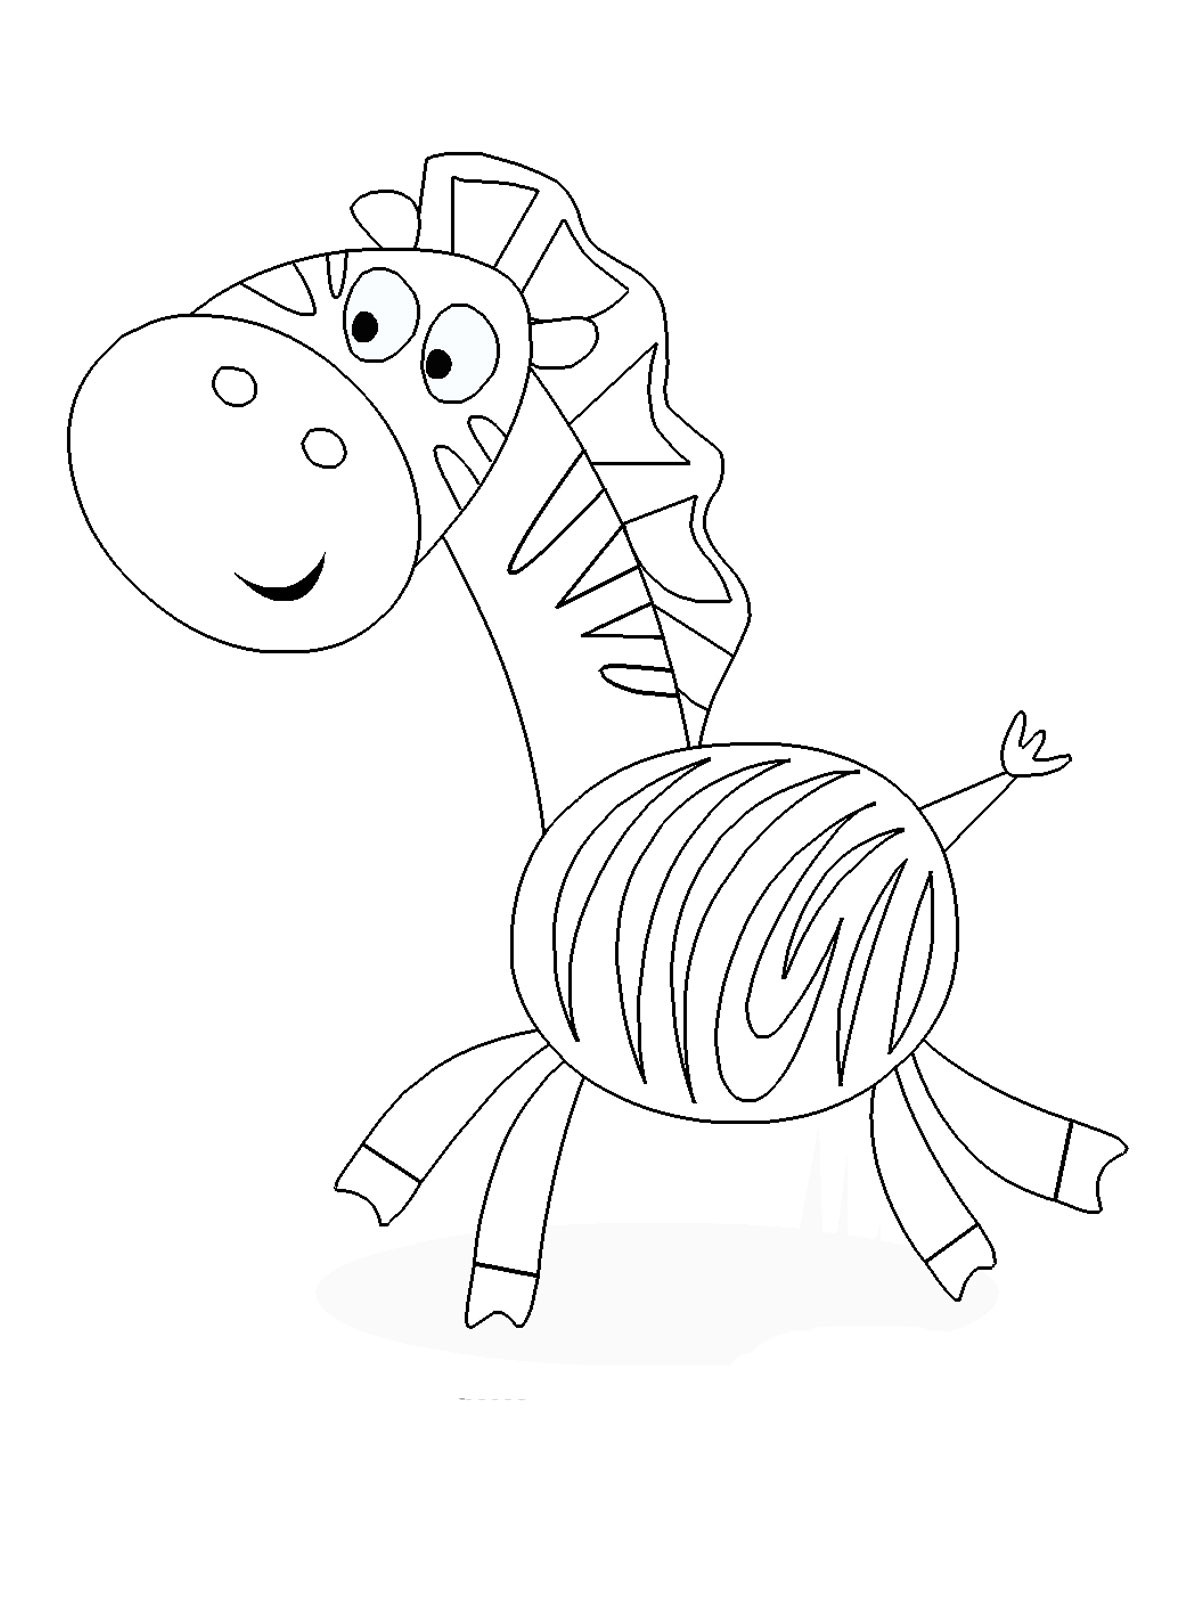 Kids Coloring Page
 Printable coloring pages for kids